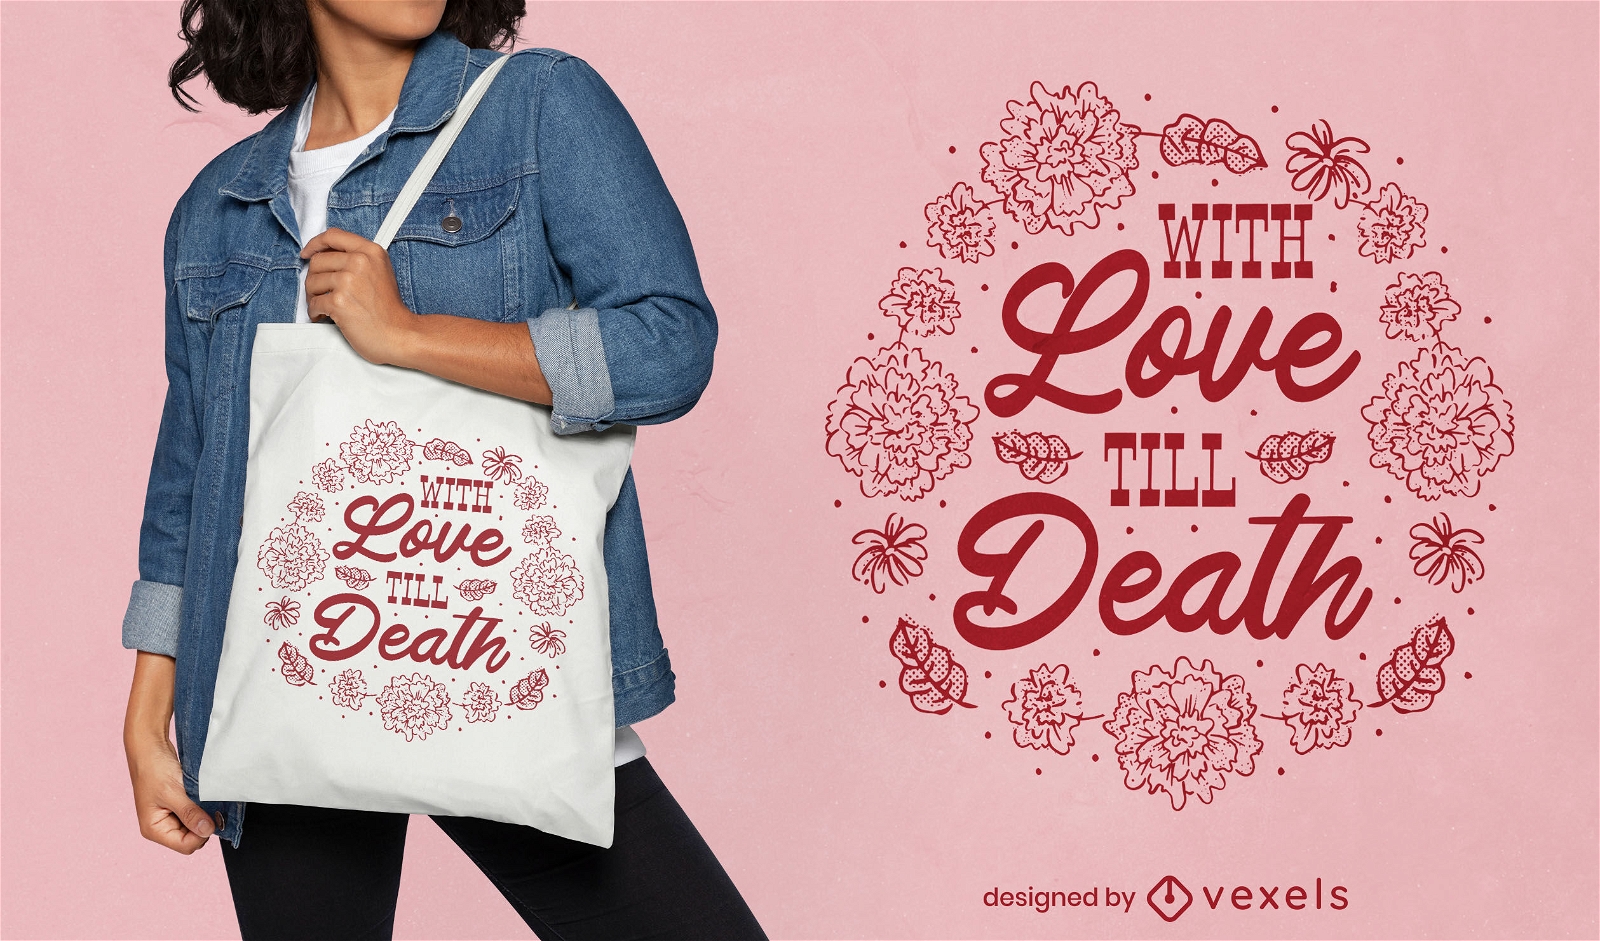 With love till death tote bag design